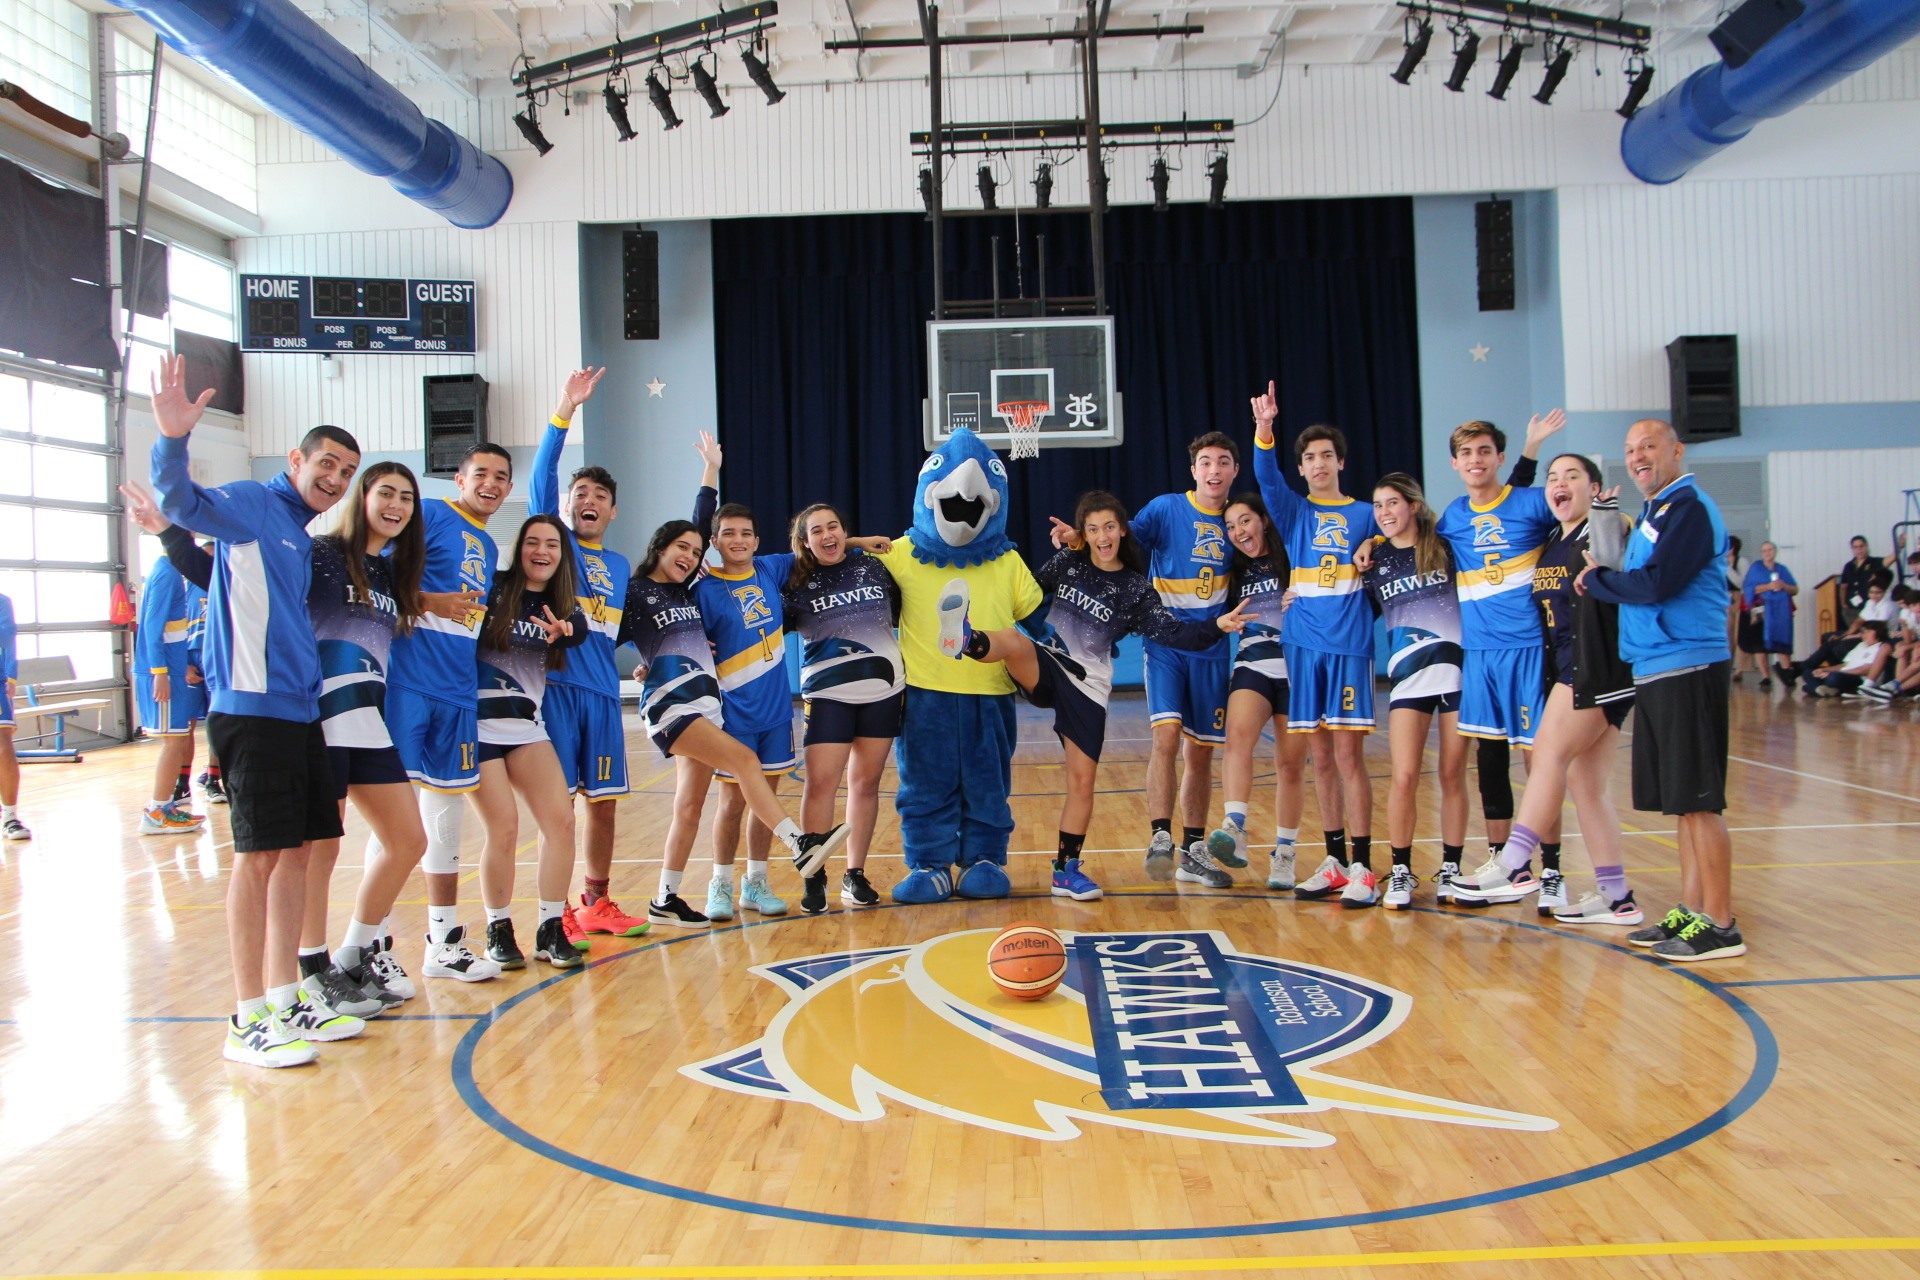 The varsity female and male basketball teams in full uniform pose with the Hawk mascot, along with their athletic coaches.